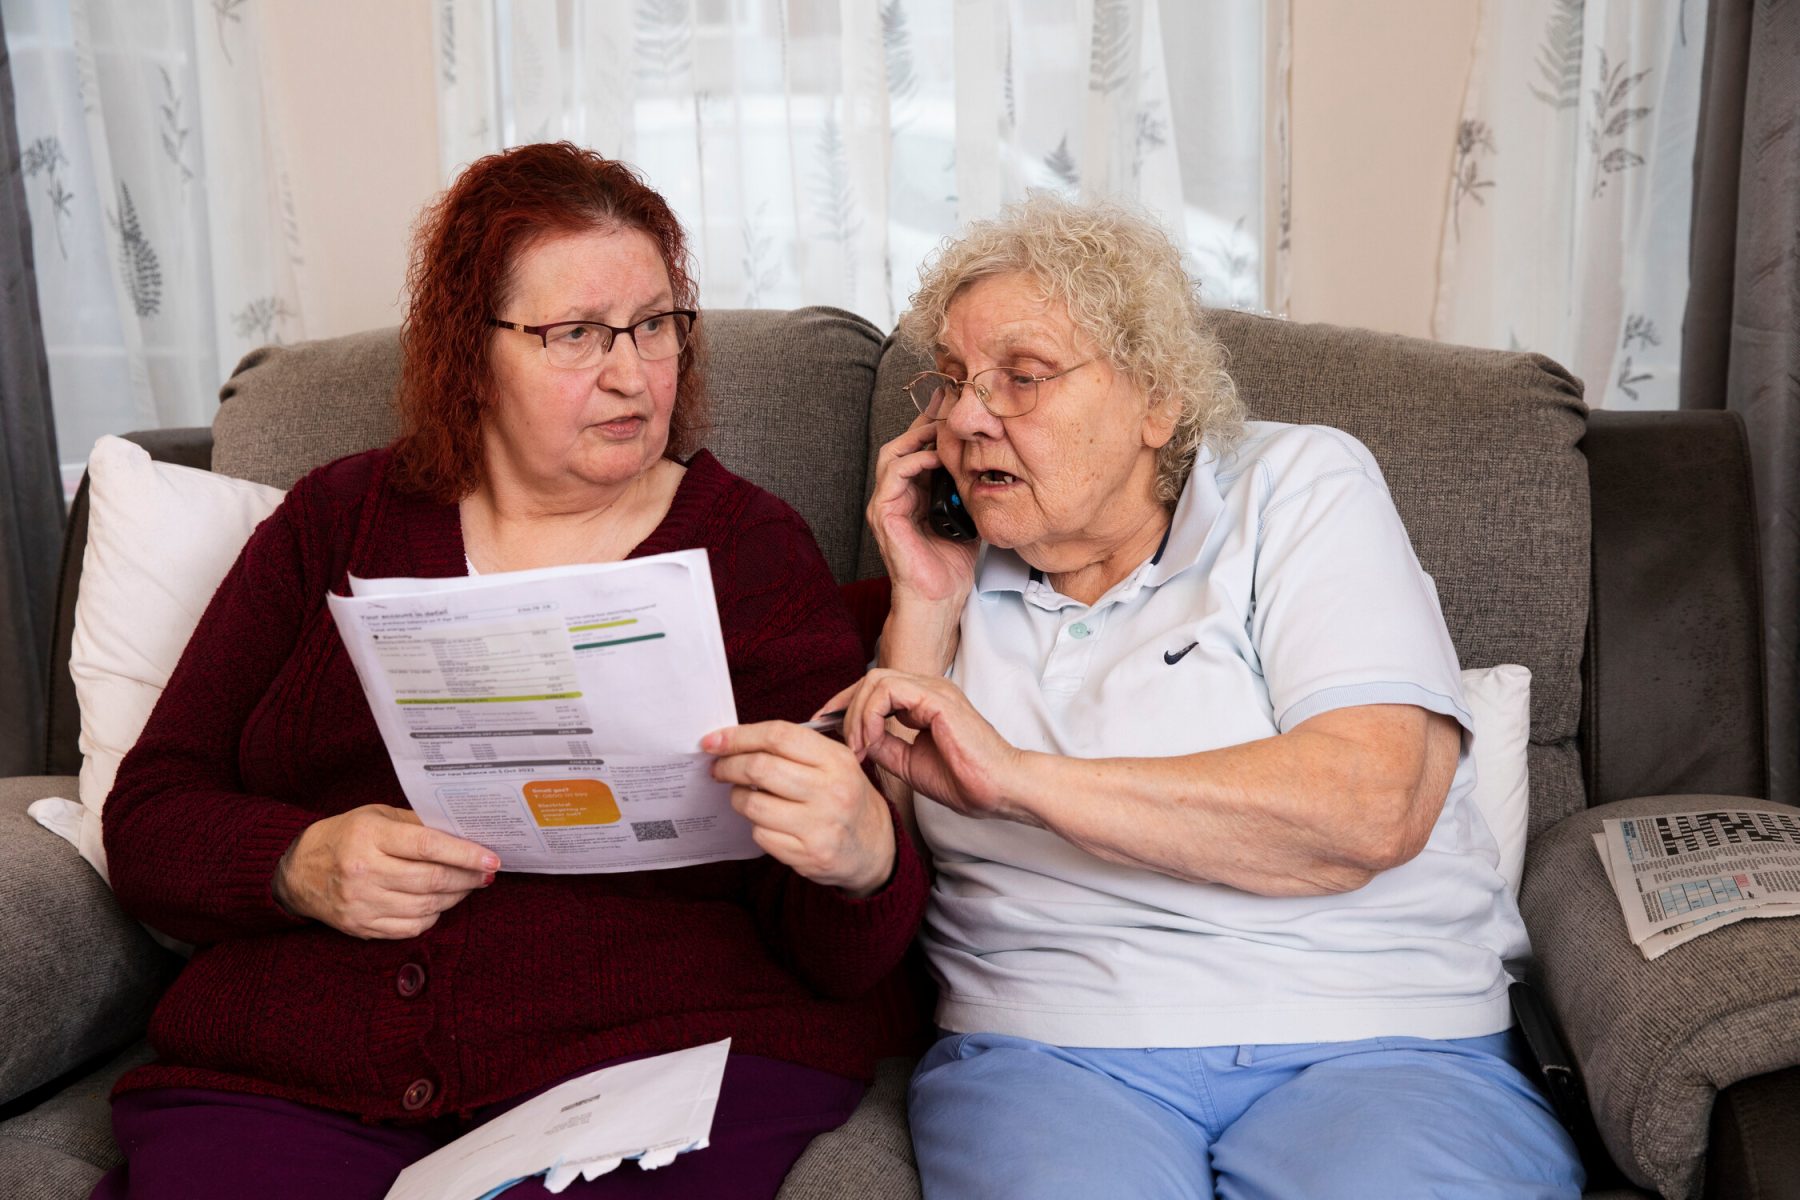 An older couple of two women reviews bills and makes a phone call.